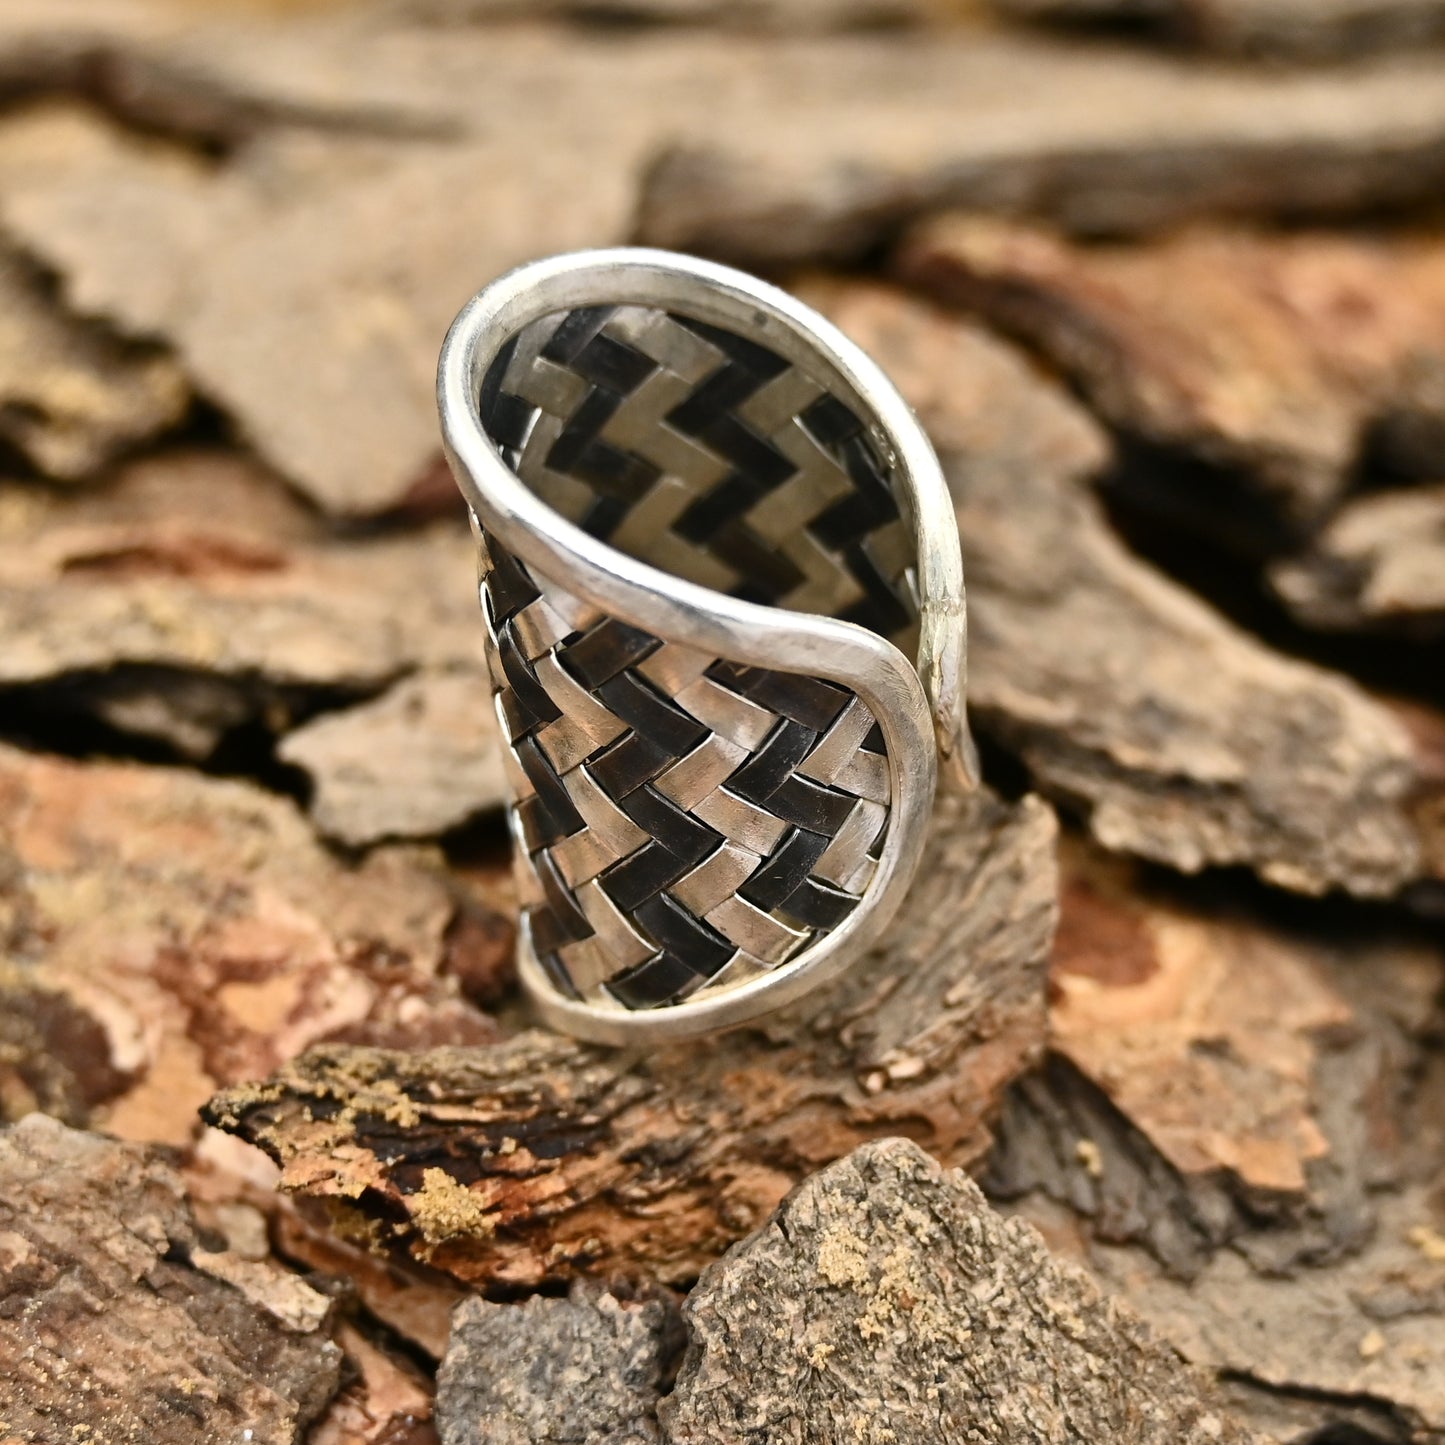 Wide Woven Ring in Black & White! ⚫⚪✨